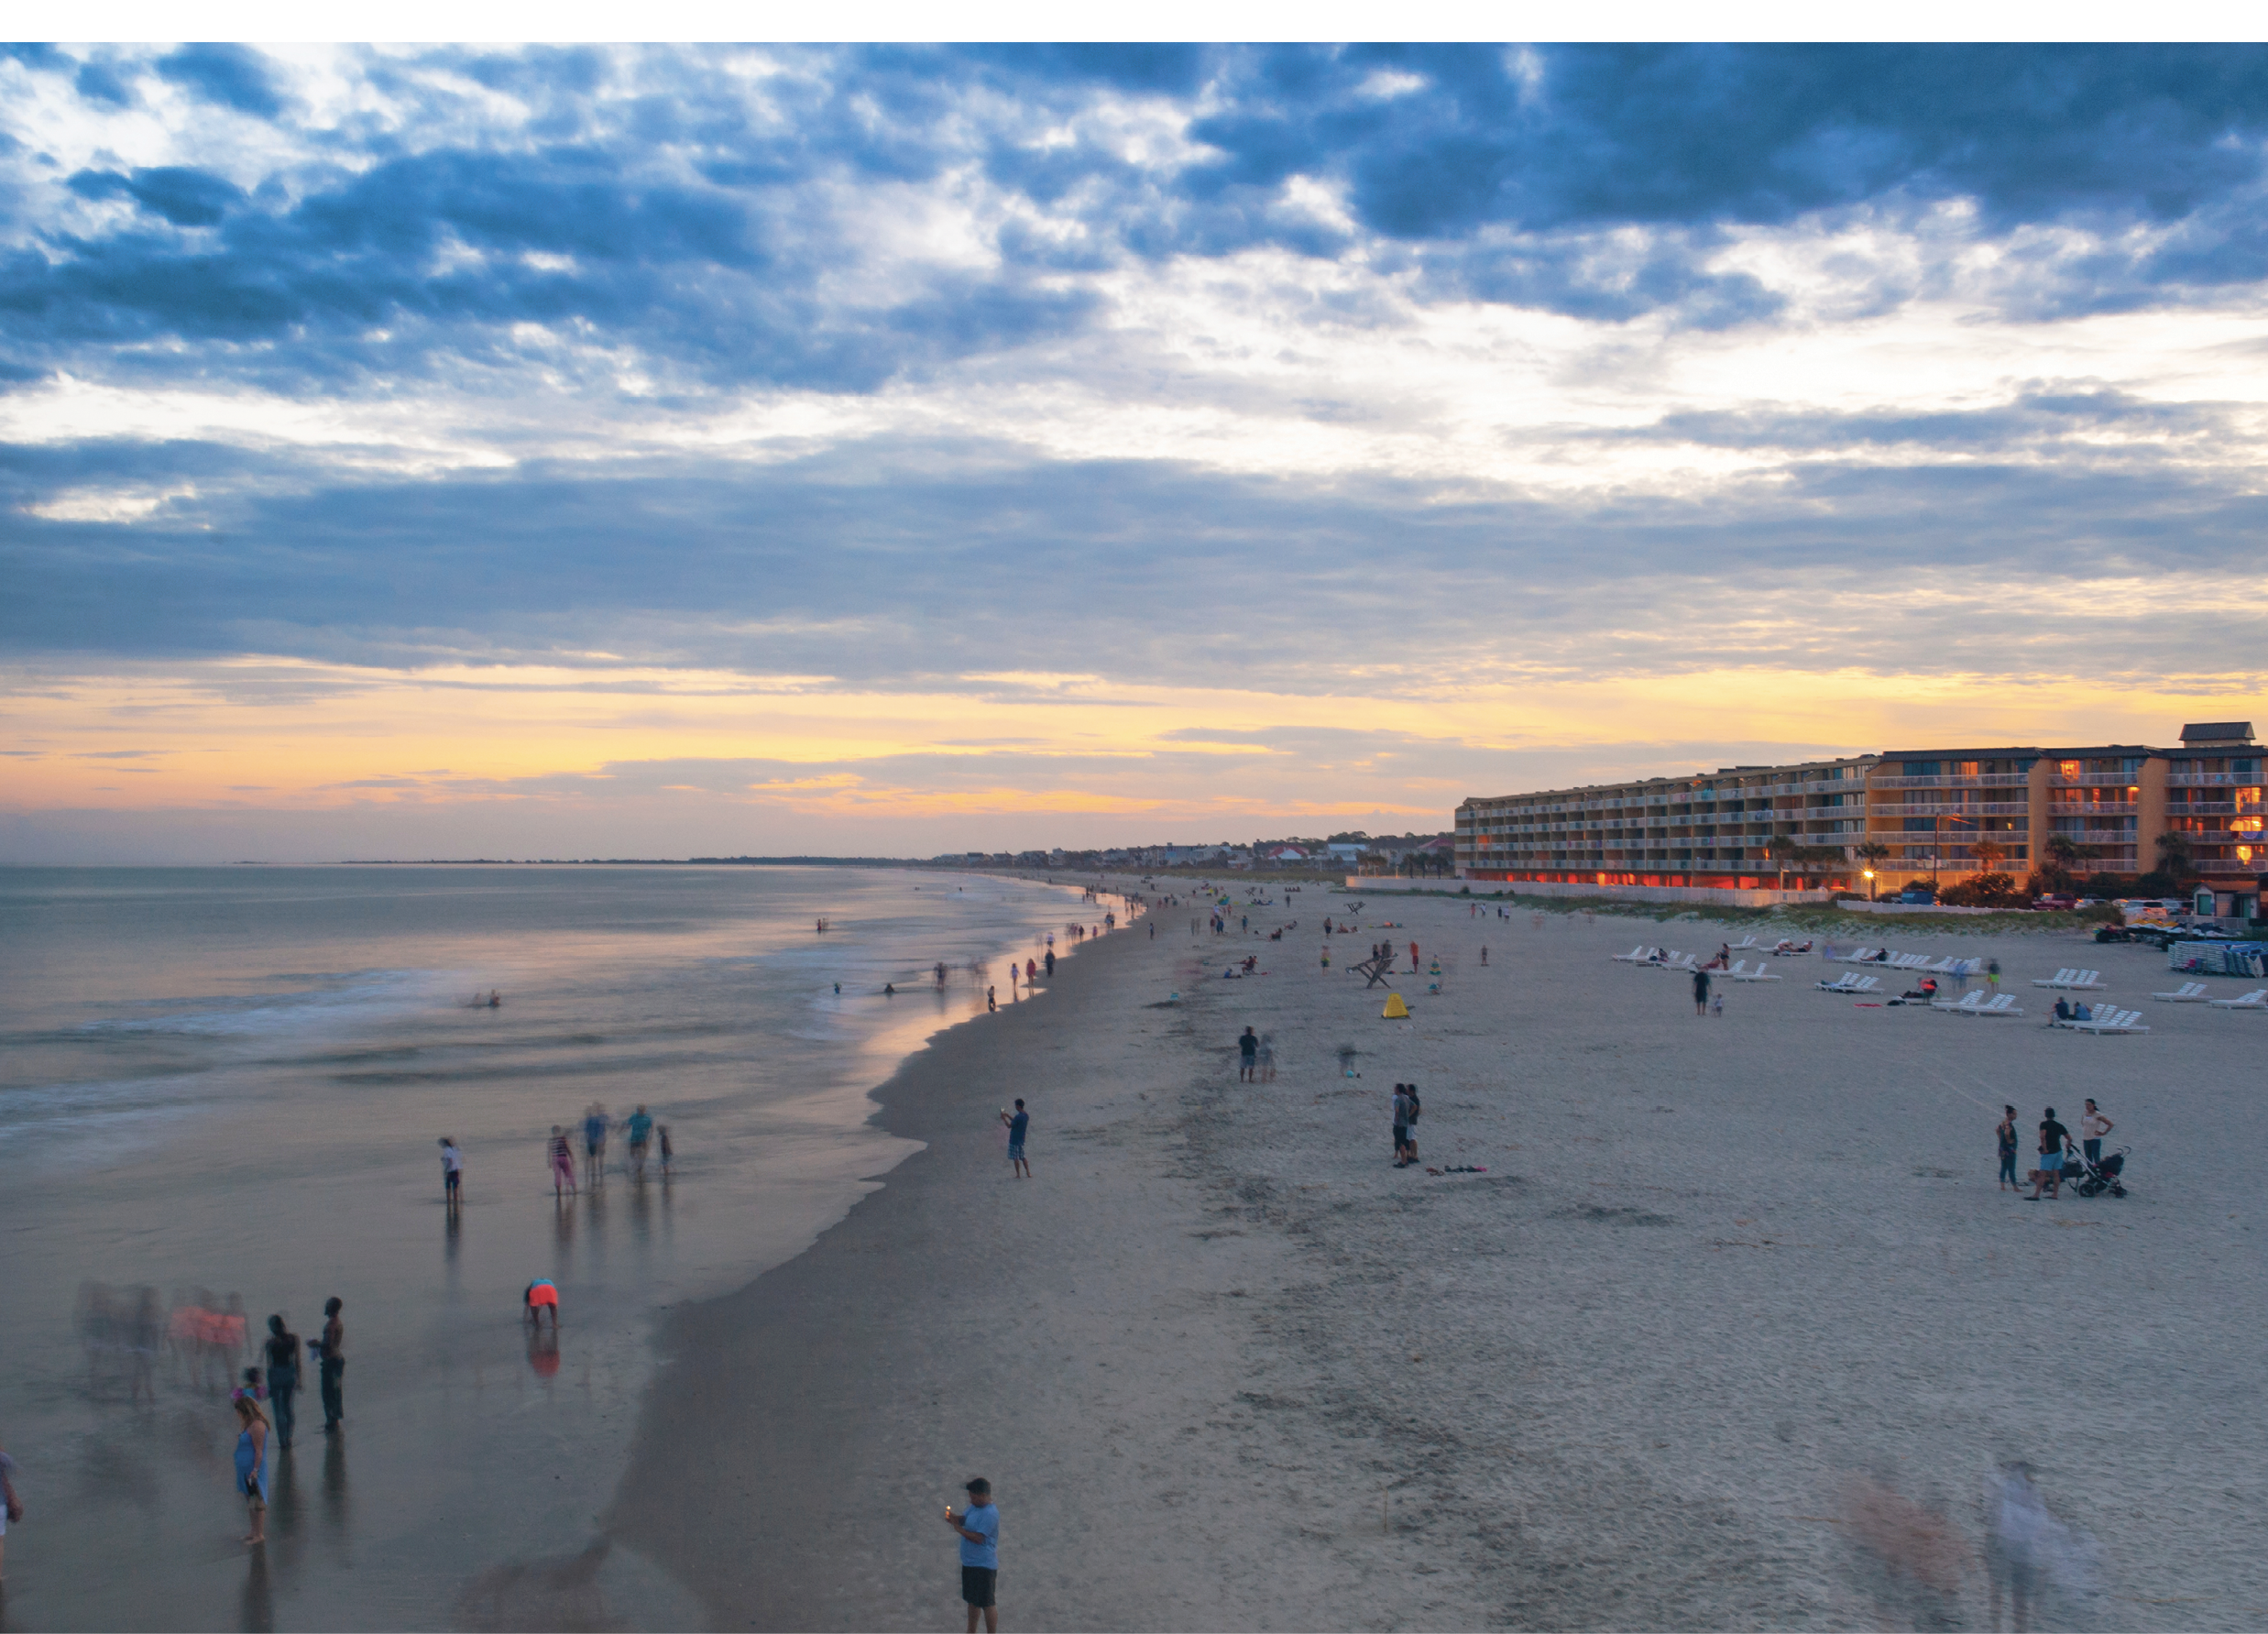 With front beach hotel and condo accommodations and an array of restaurants, bars and shops, Folly Beach (pictured above last July) welcomes visitors seeking relaxed, salty fun at the Edge of America.